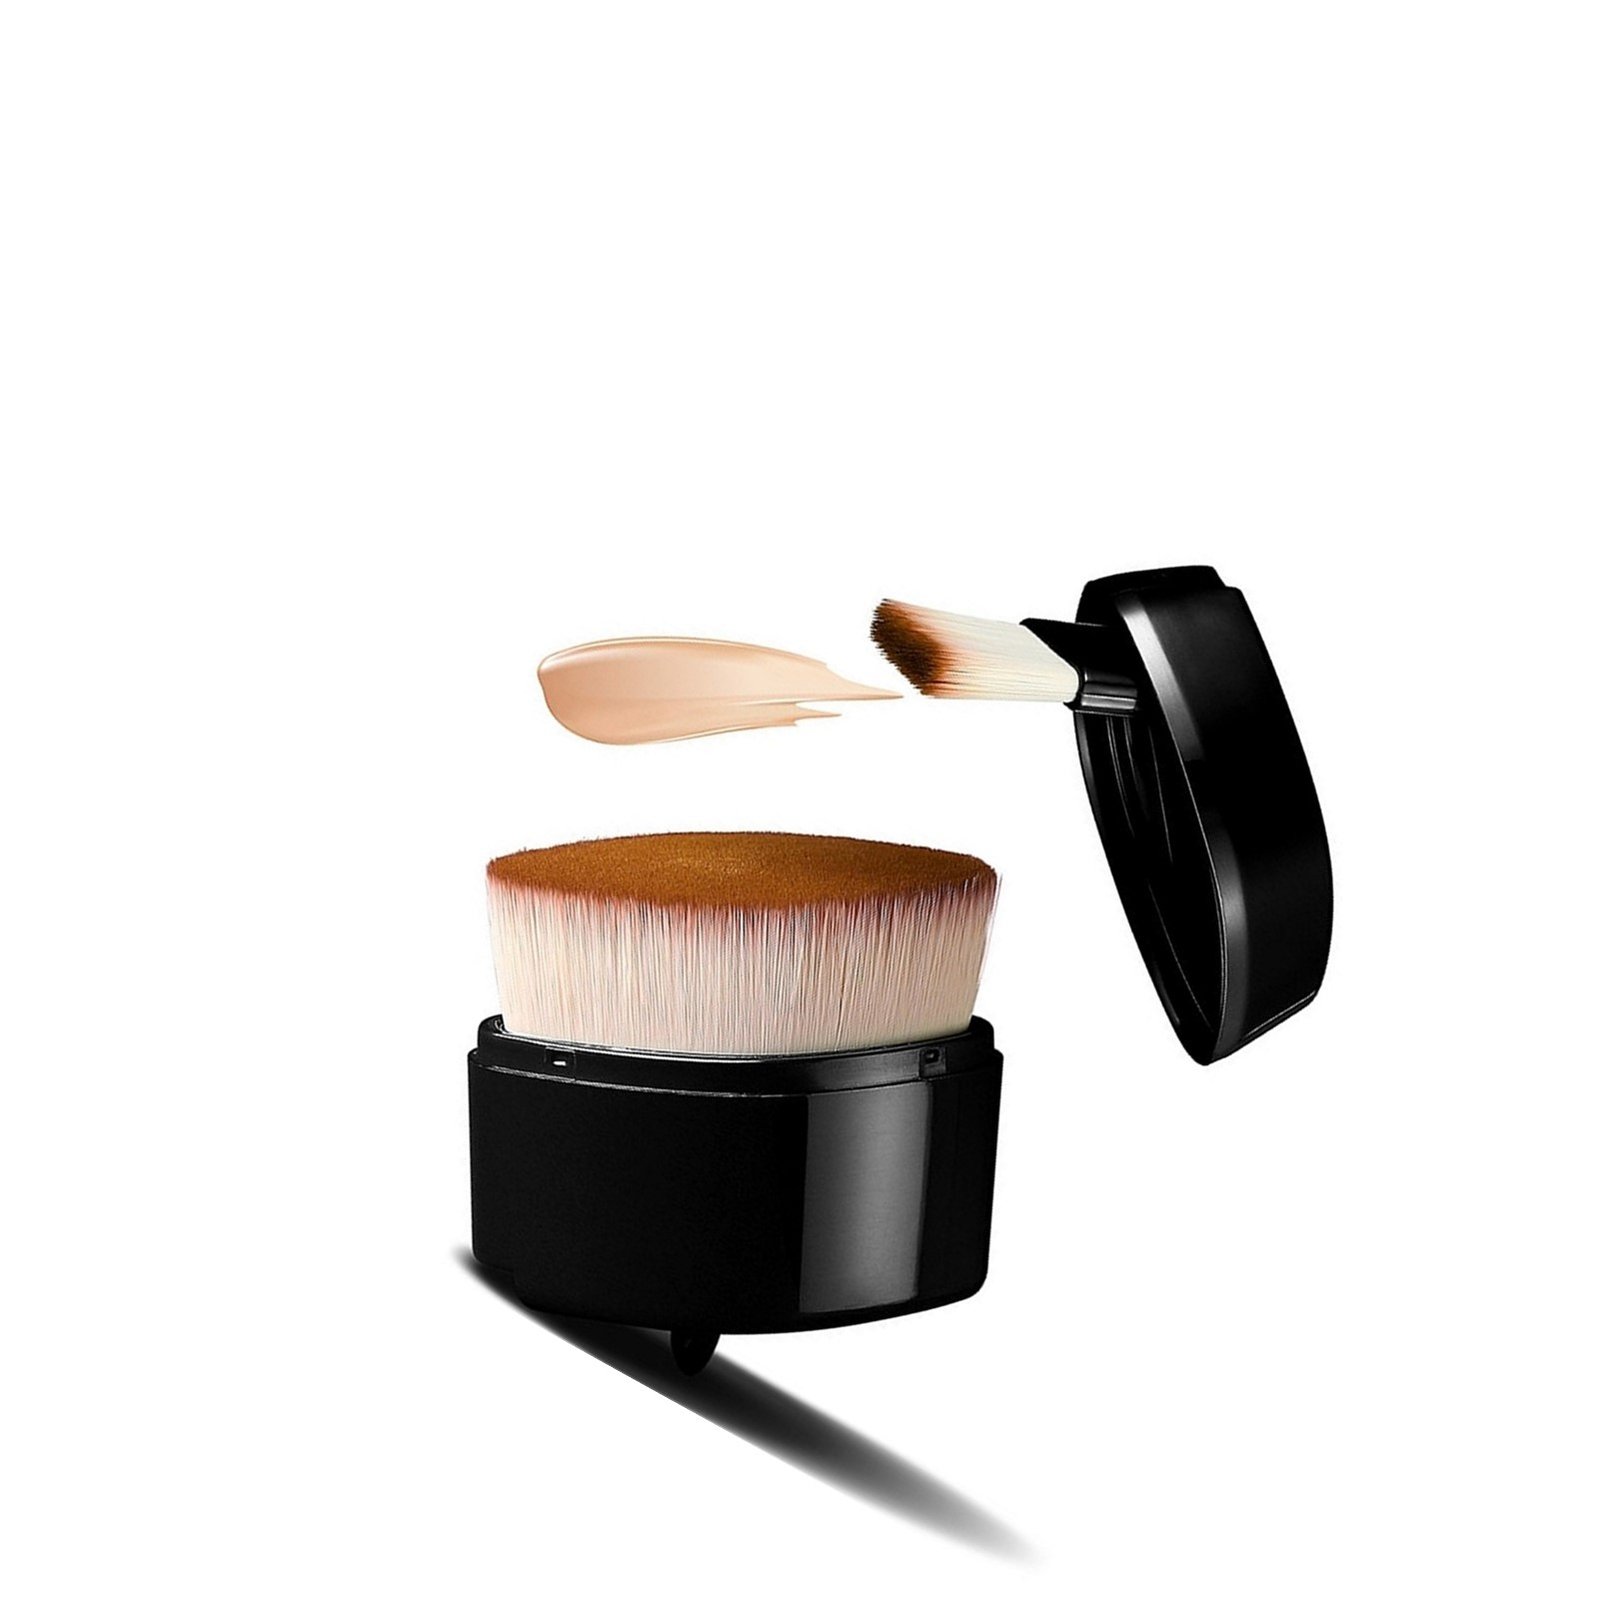 Eigshow Beauty 2-In-1 Foundation Makeup Brush Portable Kit Black